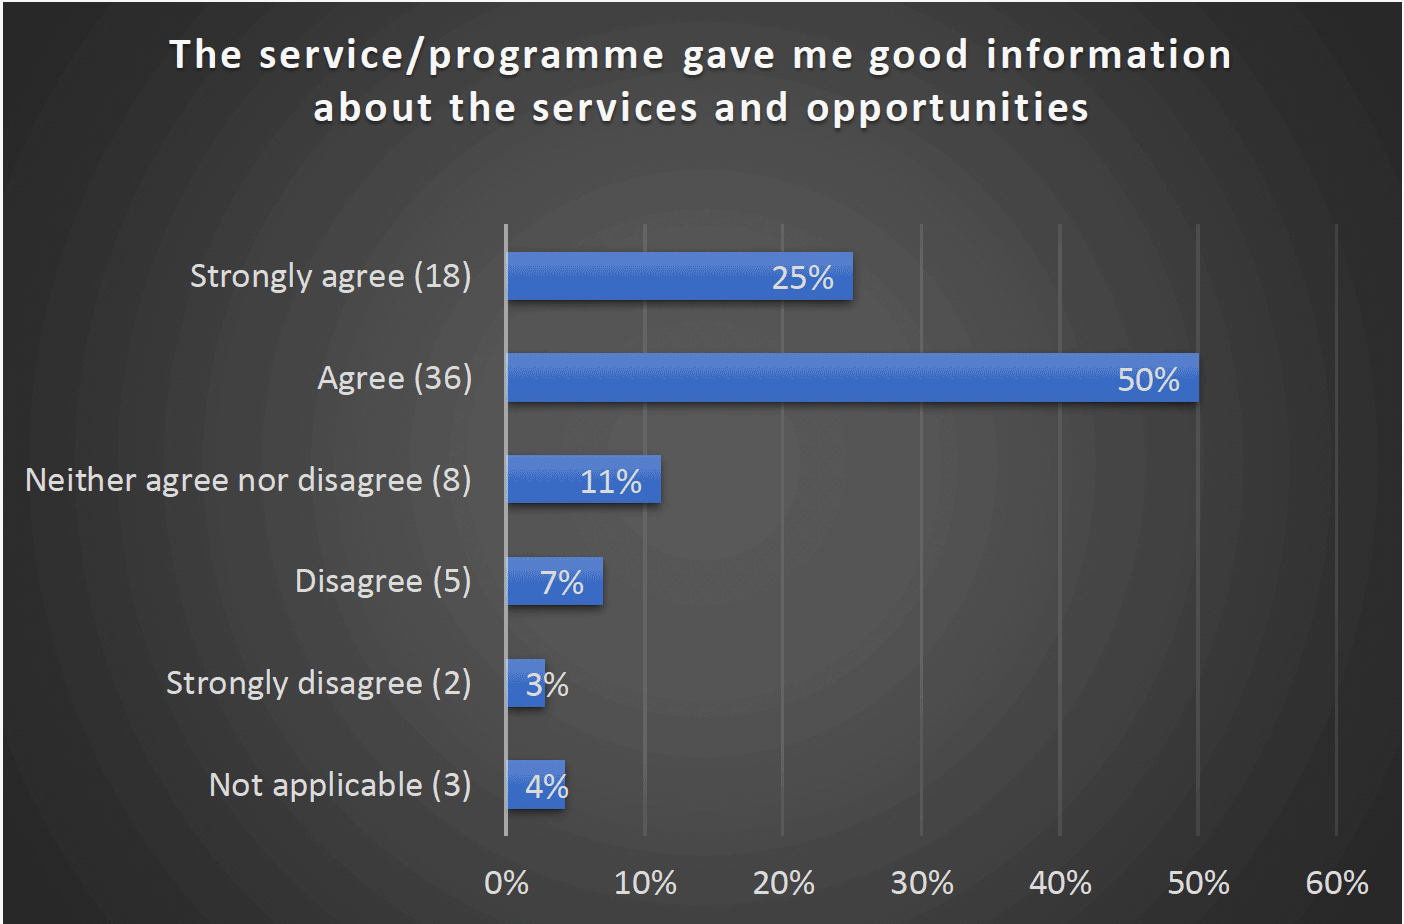 The service/programme gave me good information about the services and opportunities - Strongly agree (18) 25%, Agree (36) 50%, Neither agree nor disagree (8) 11%, Disagree (5) 7%, Strongly disagree (2) 3%, Not applicable (3) 4%